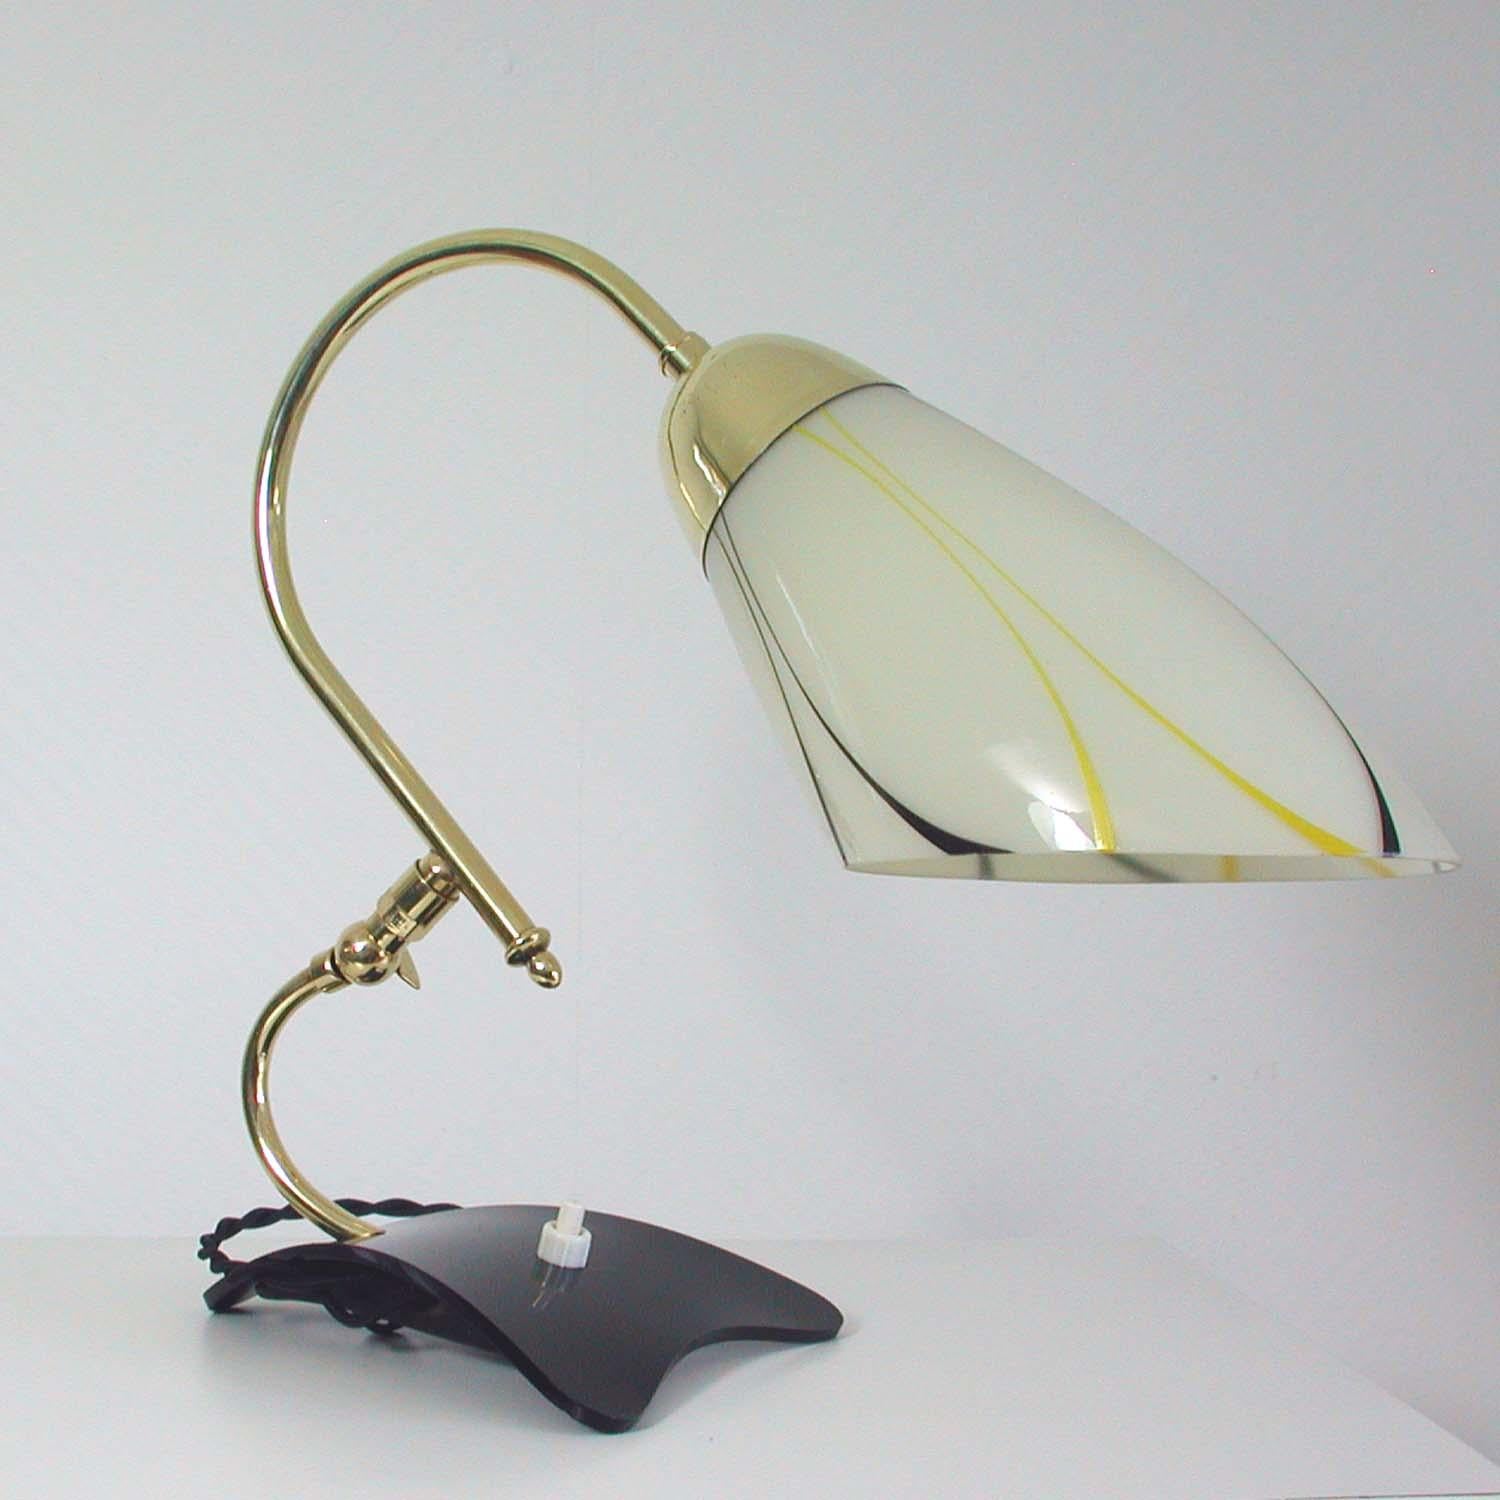 This beautiful table lamp was manufactured in Germany at the beginning of the 1950s.

It has got a black plastic base, an adjustable brass lamp arm and a yellow, white and black glass lampshade.

In excellent condition, rewired for North